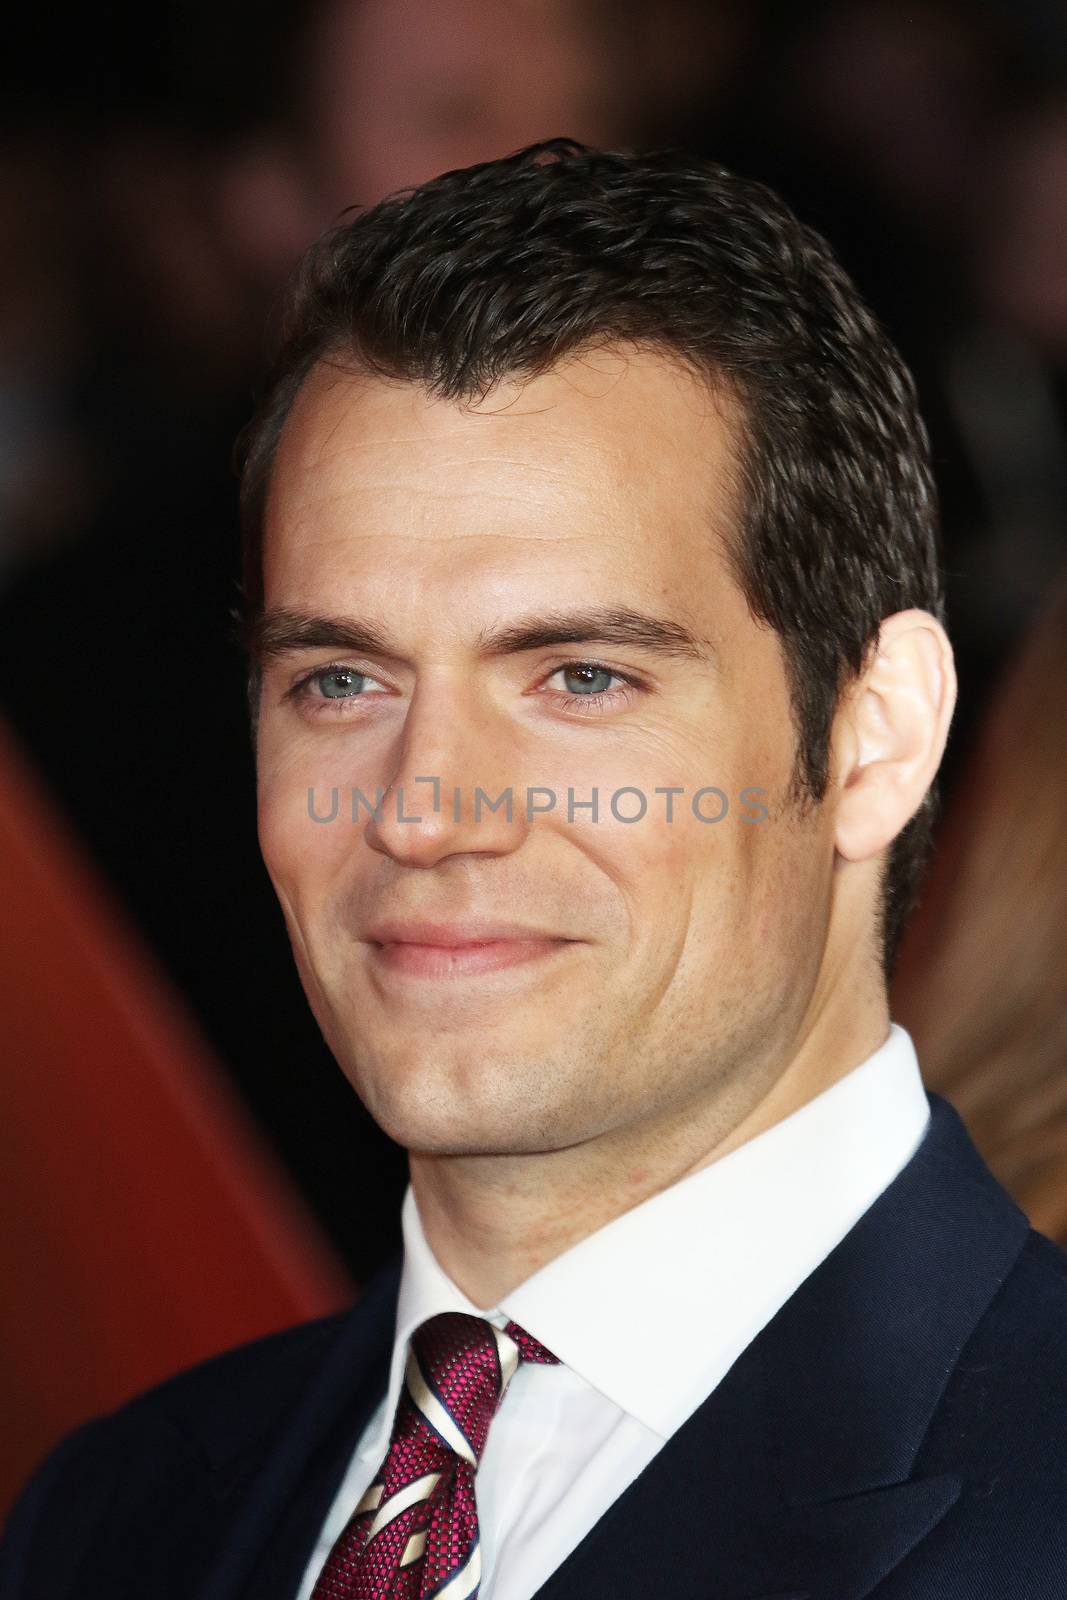 UK, London: Henry Cavill poses on the red carpet for the Batman v Superman: Dawn of Justice European film premiere in Leicester Square, London on March 22, 2016.